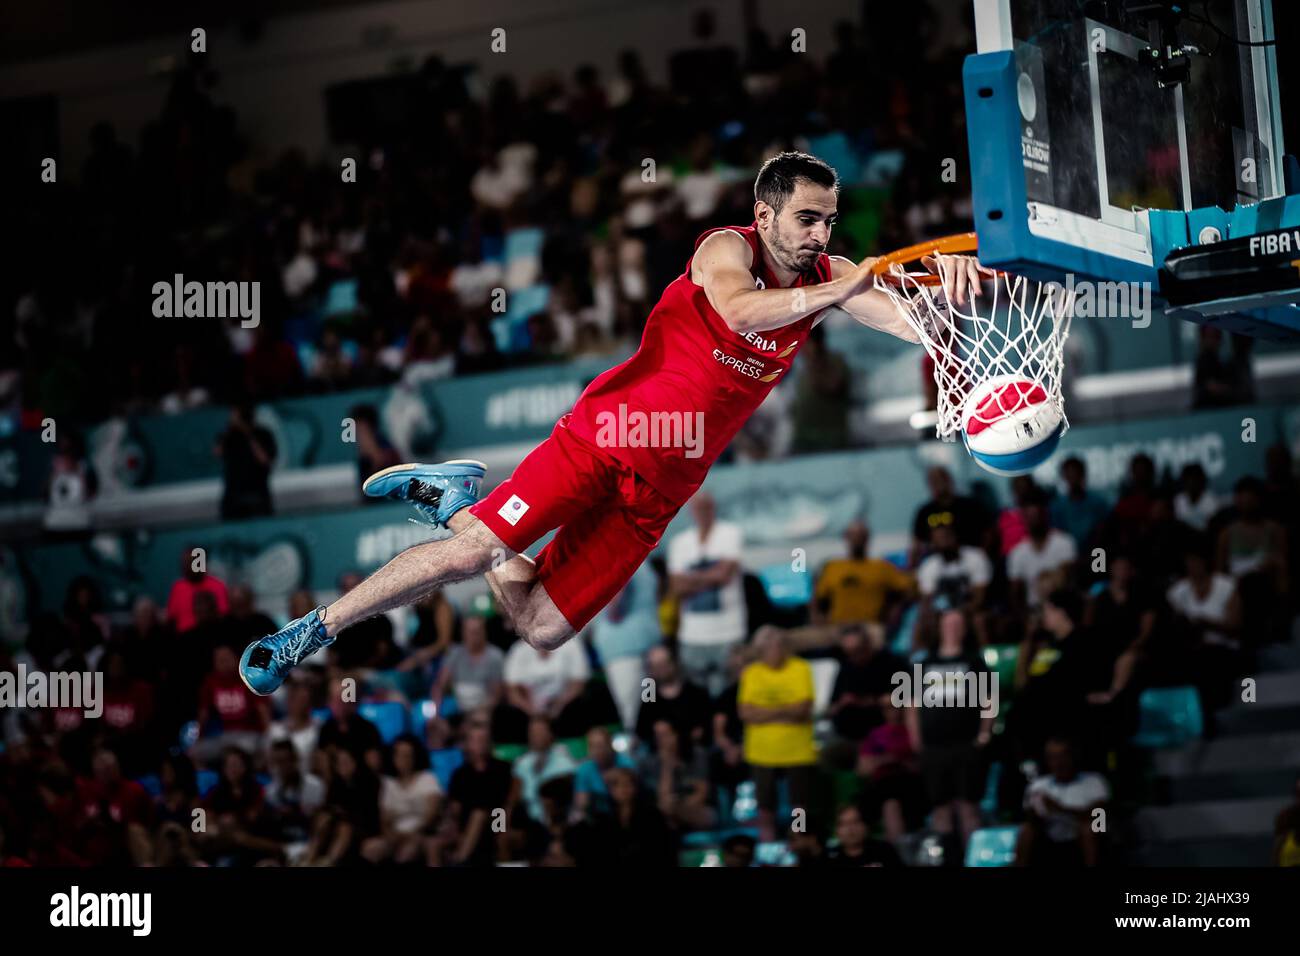 Tenerife, Spain, September 23, 2018:basketball player making a slam dunk during an acrobatic basketball show Stock Photo